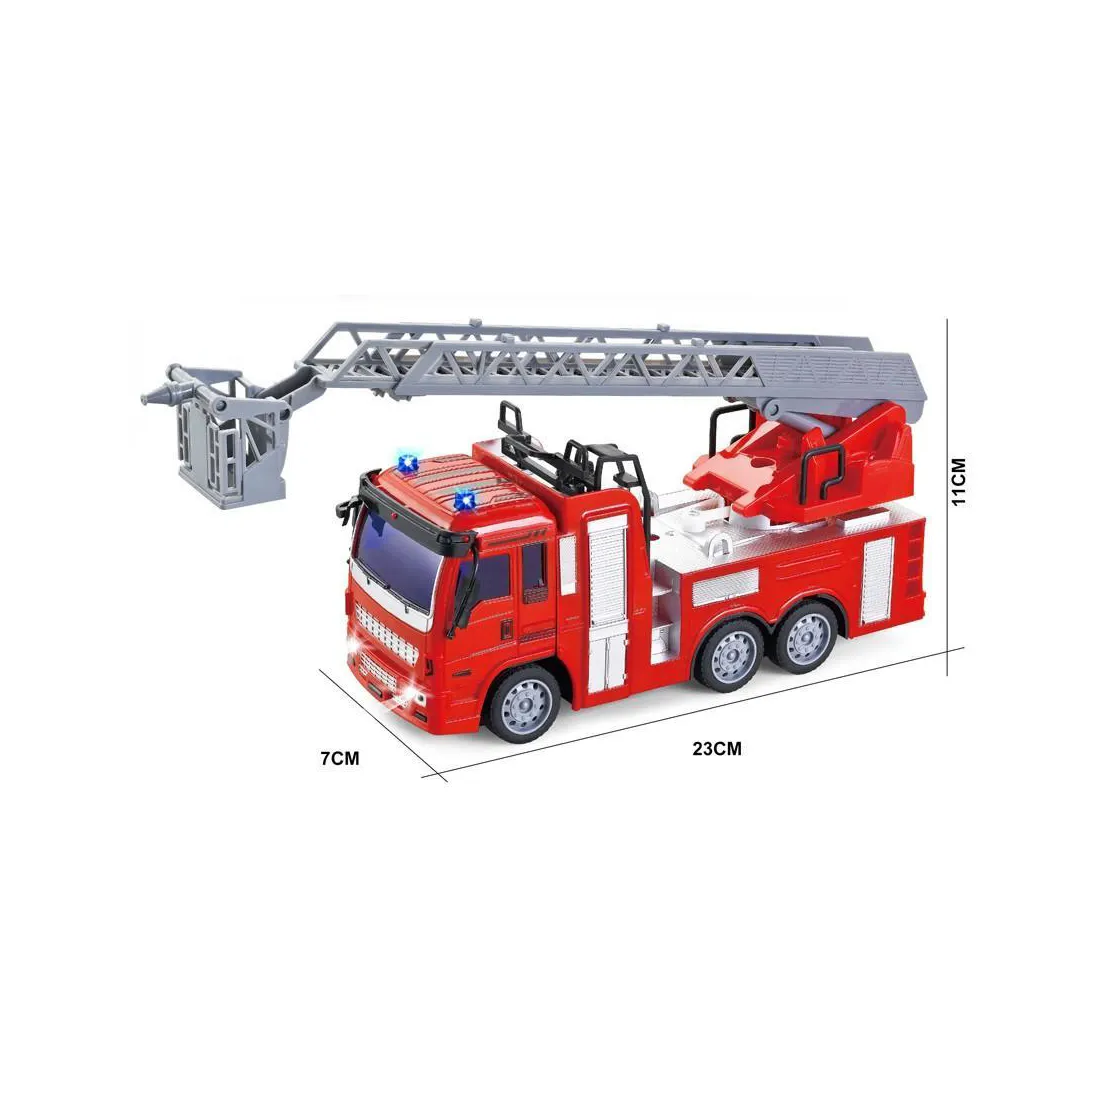 Remote Control Engineering Truck 1/30 4channel 27Mhz Radio Control Toys RC Fire Truck Toy with Fire Ladder and Light